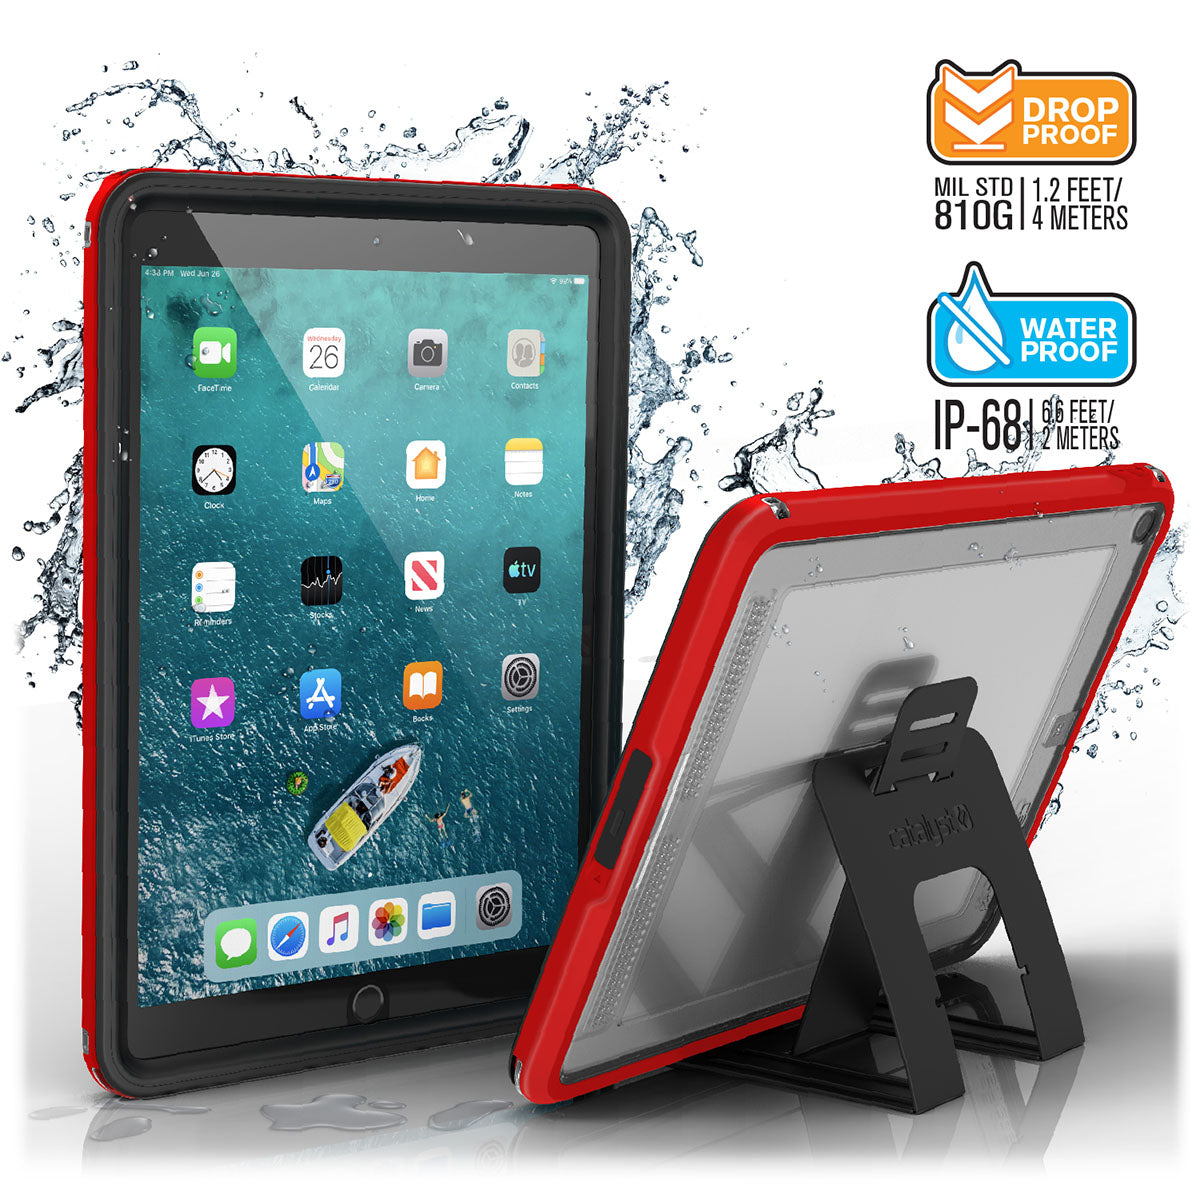 catalyst ipad air gen 3 10.5 waterproof case flame red front and back view with stand and splashes of water text reads drop proof mil std 810g 1.2 feet 4 meters waterproof ip68 6.6 feet 2 meters